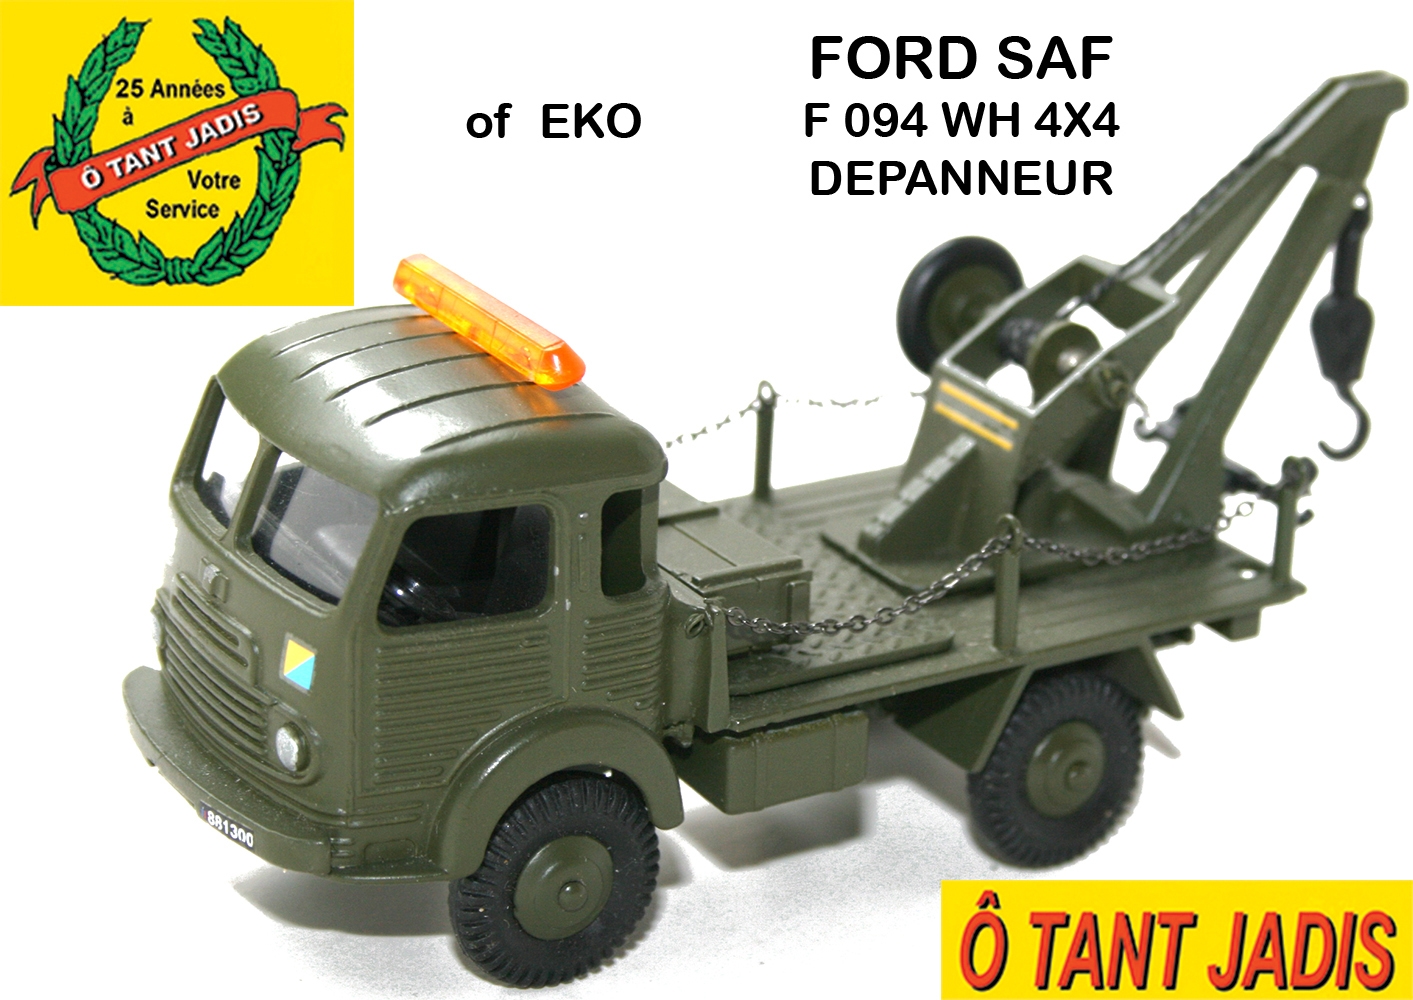 Ford Saf F 094 Wh 4x2 Tow Truck O Tant Jadis